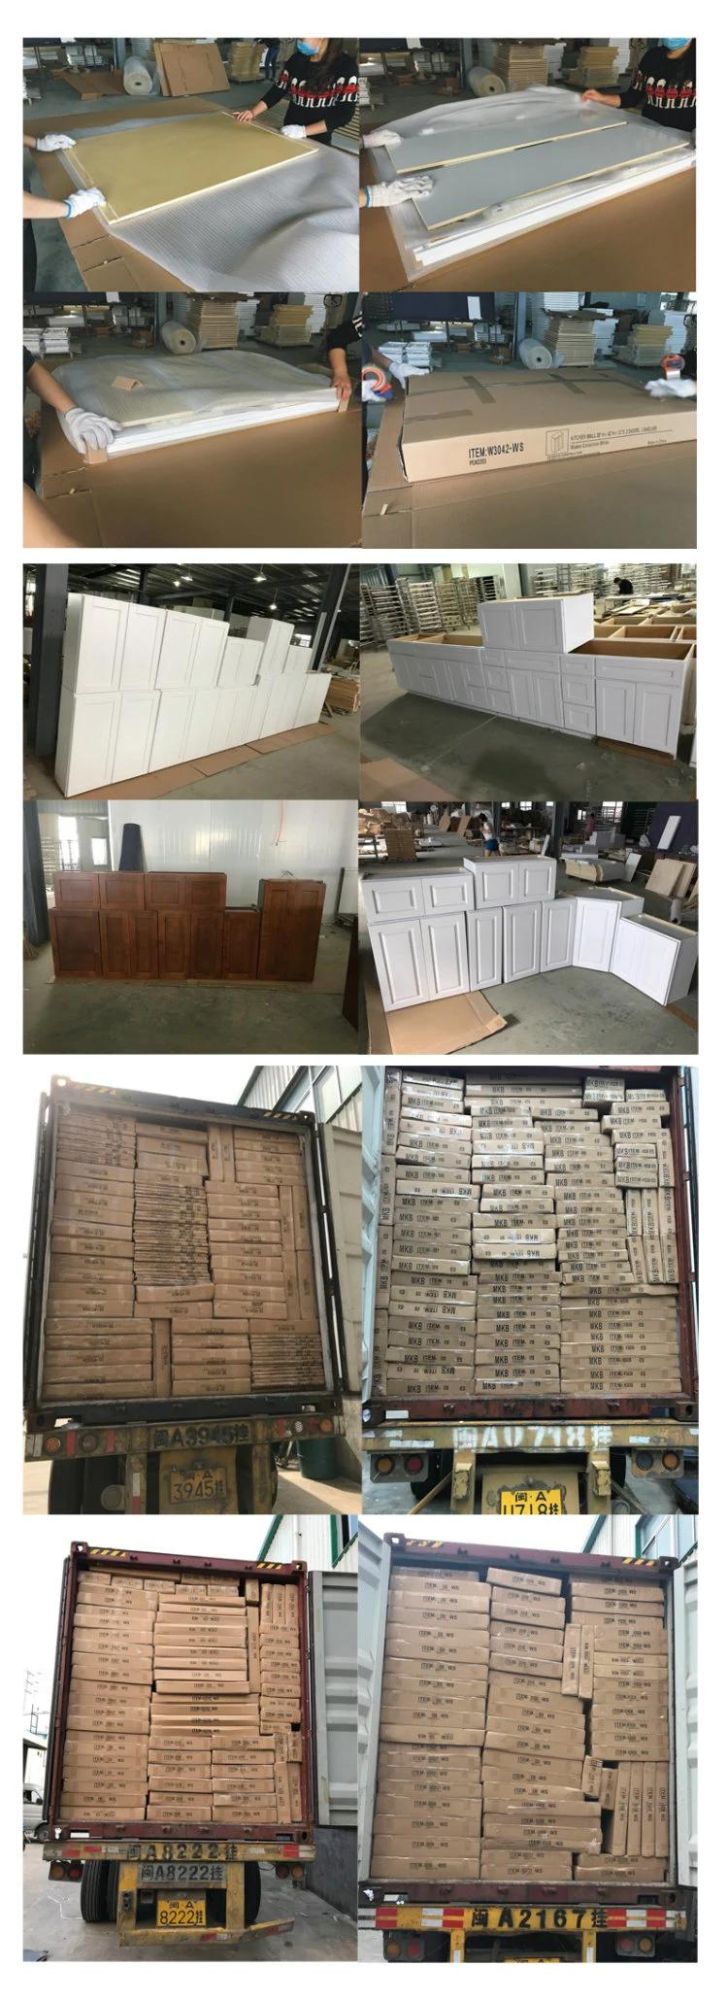 New American Style Solid Wood Kitchen Cabinets at Home Depot